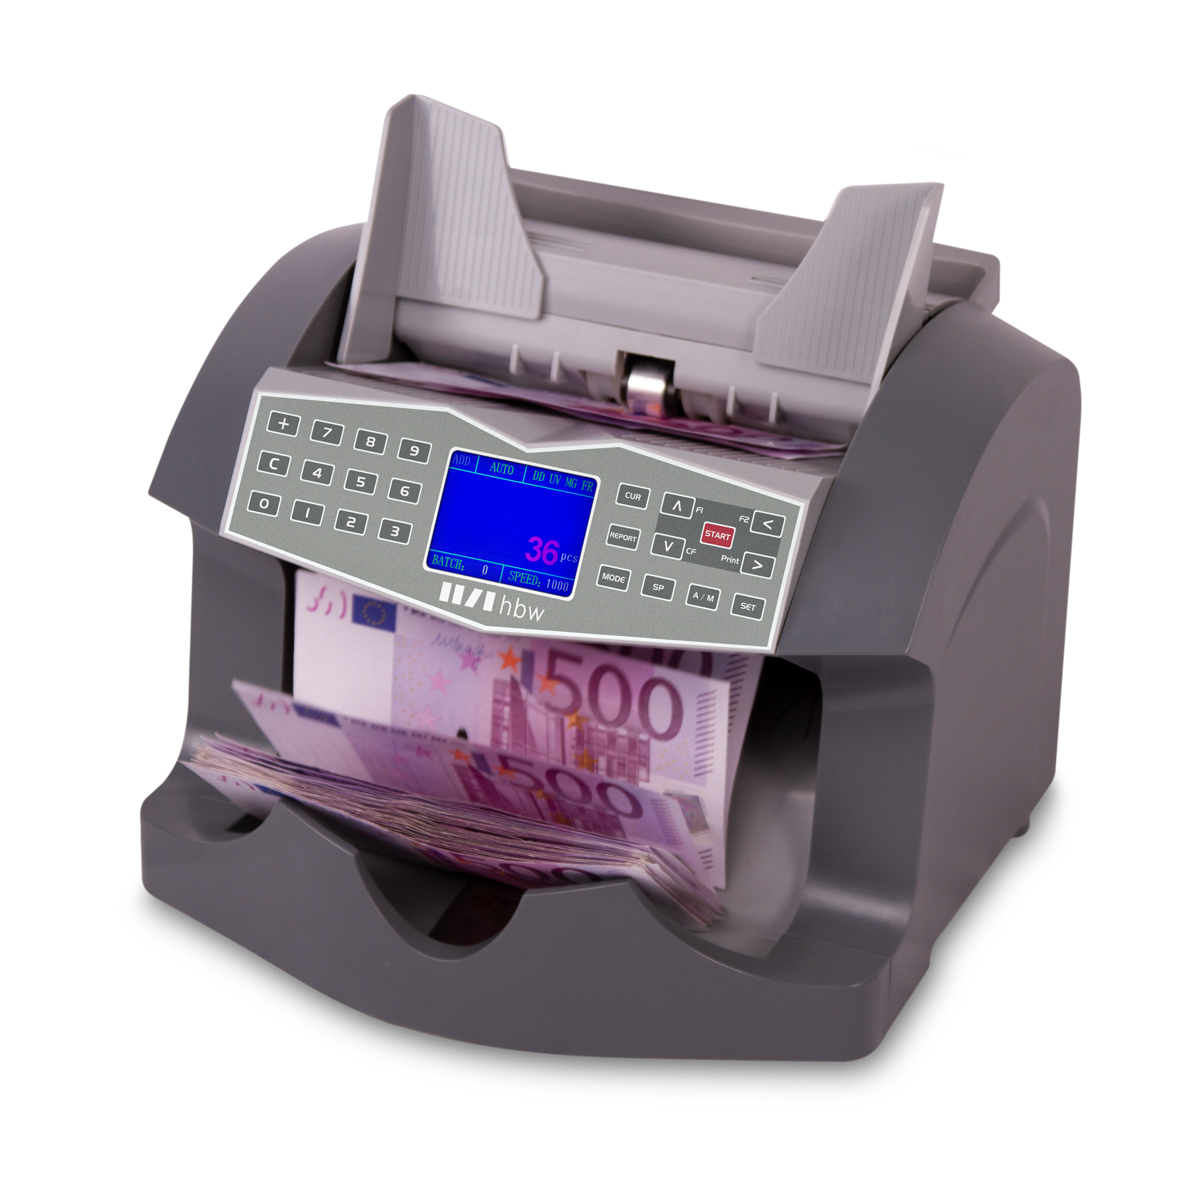 Banknote counters hbw VC 6040 Plus